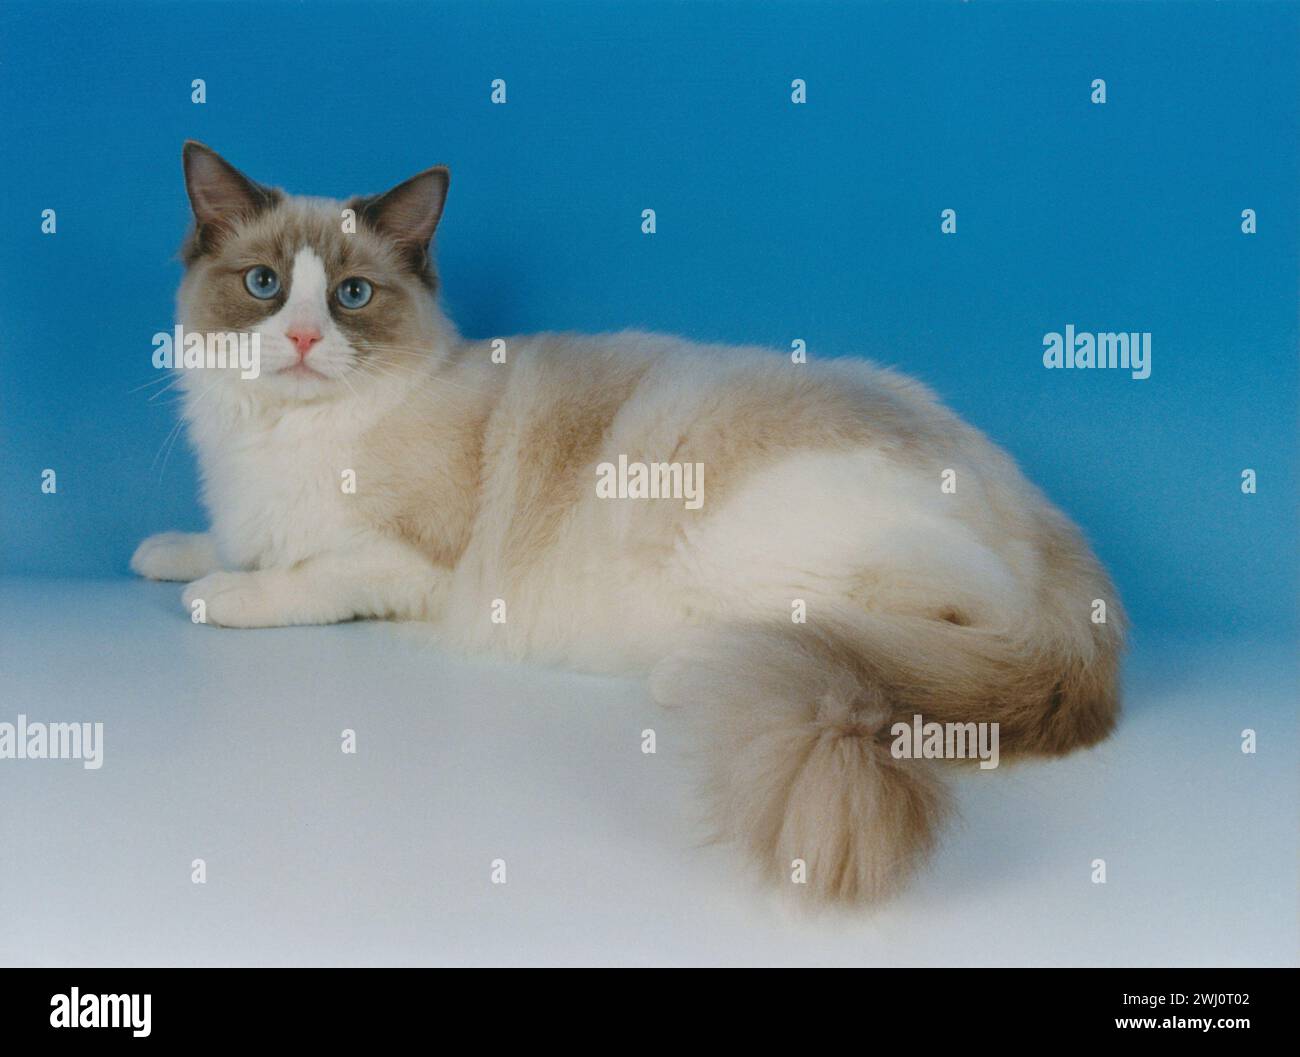 Ragdoll Cat Blue Bicolour Layed on a Blue to White Background Stock Photo